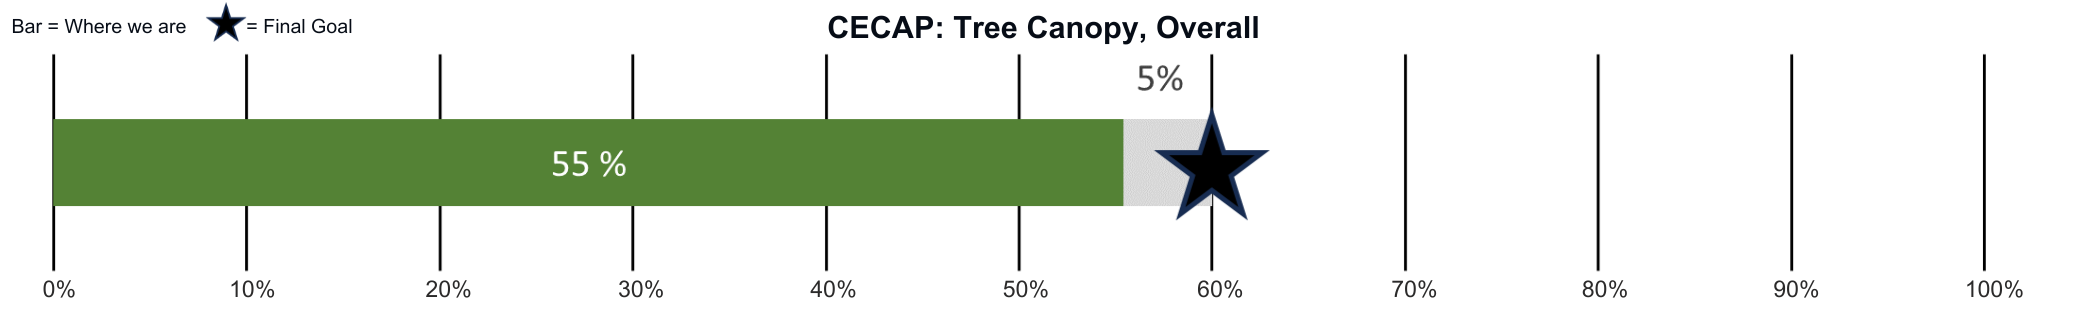 CECAP_ Expand tree canopy to 60% coverage overall in the county by 2030 goal bar with progress showing 55%